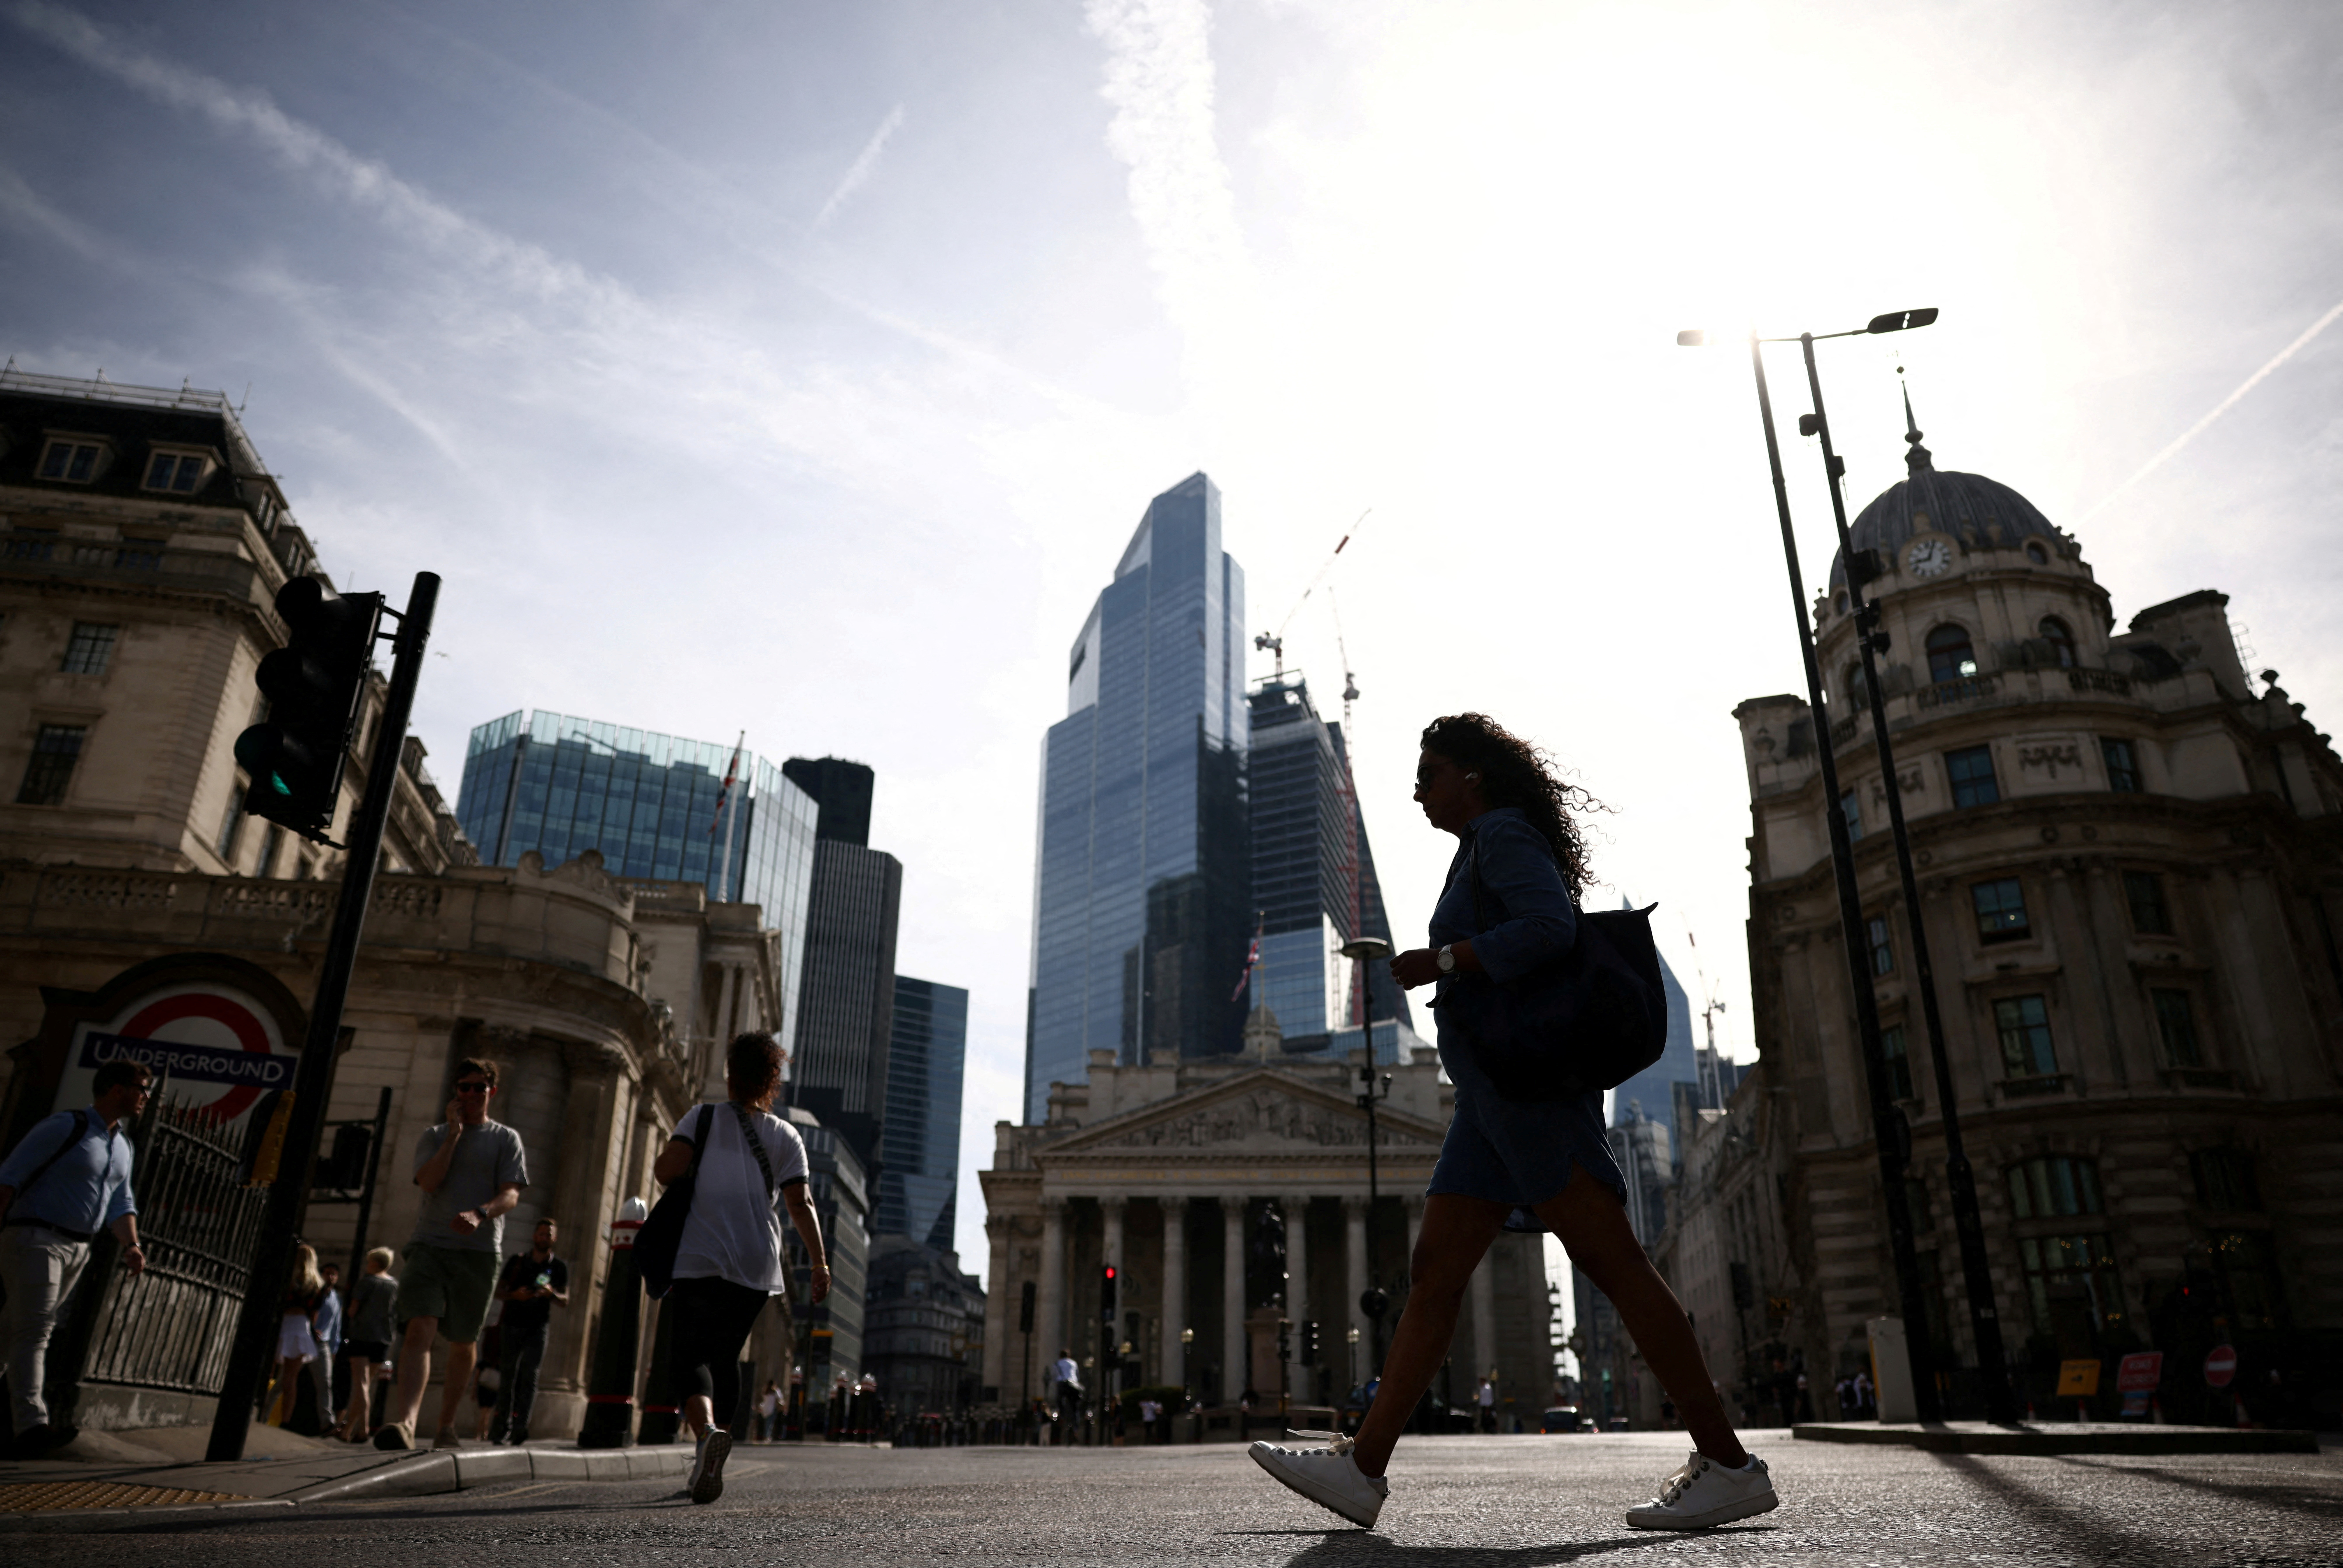 People walk through the City of London financial district during warm weather in London